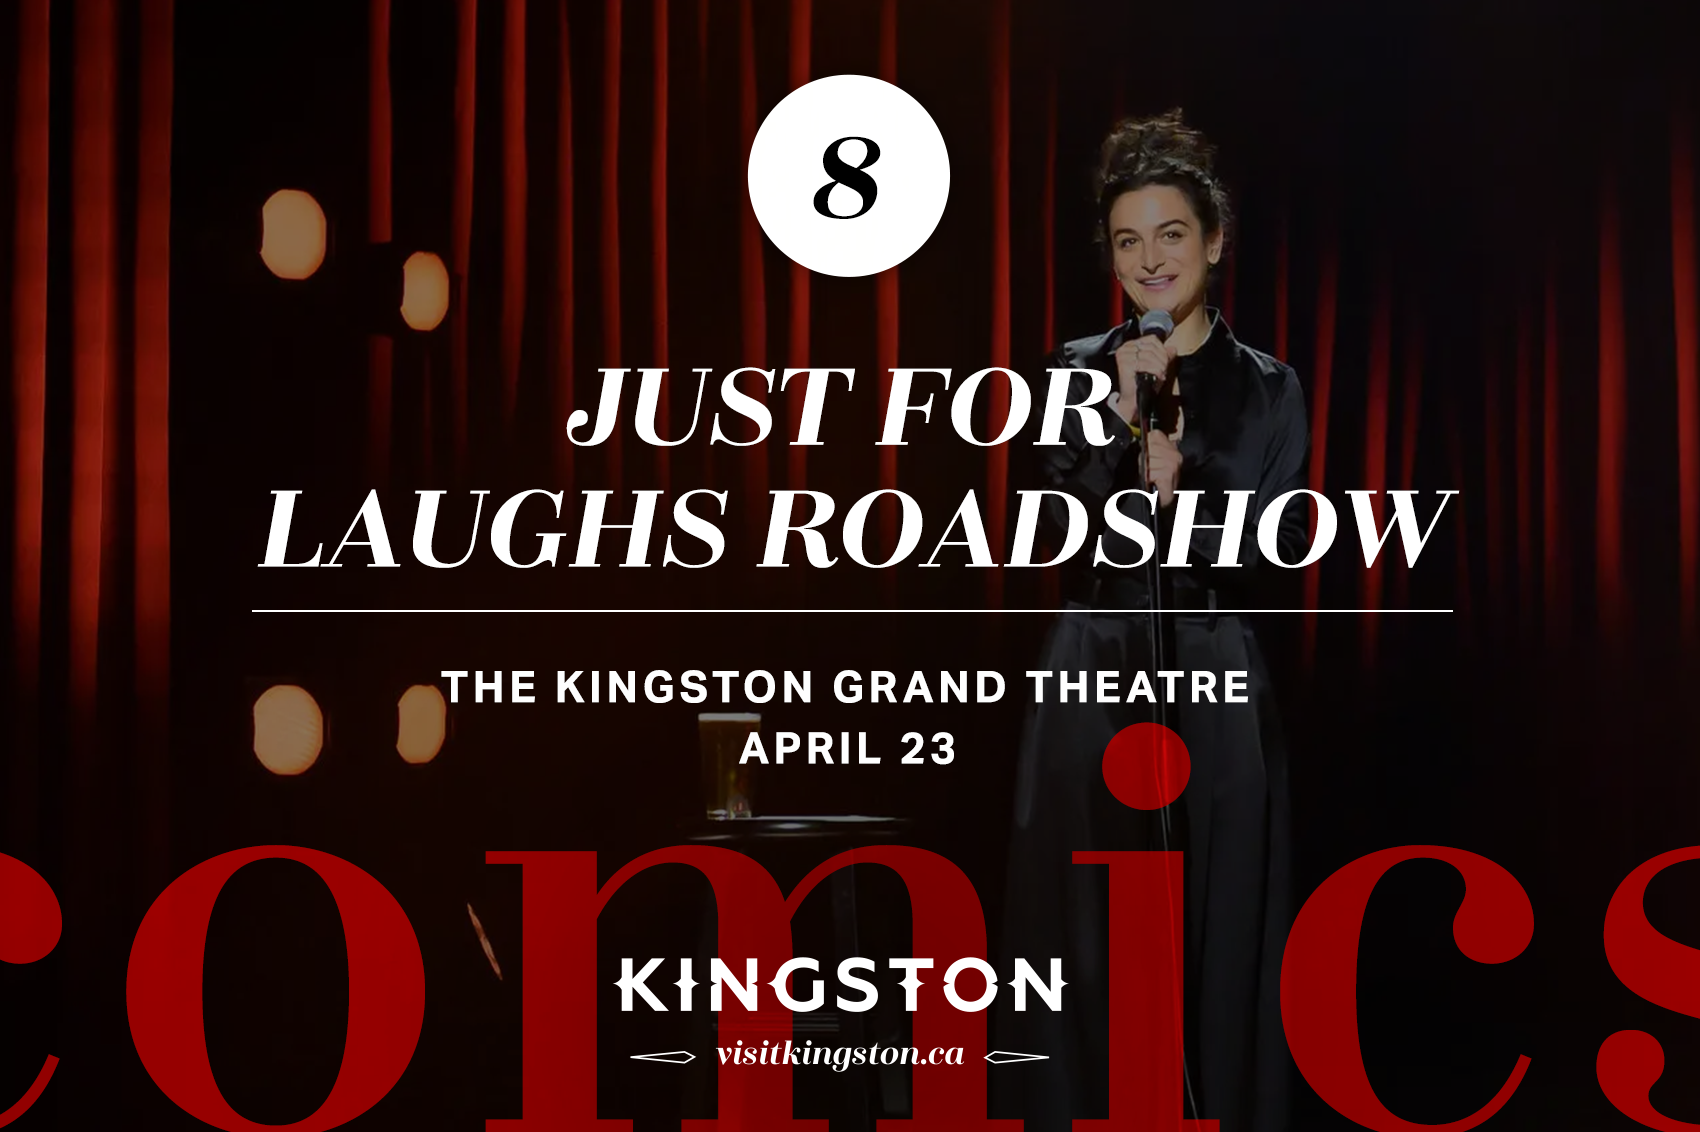 Just for Laughs Roadshow